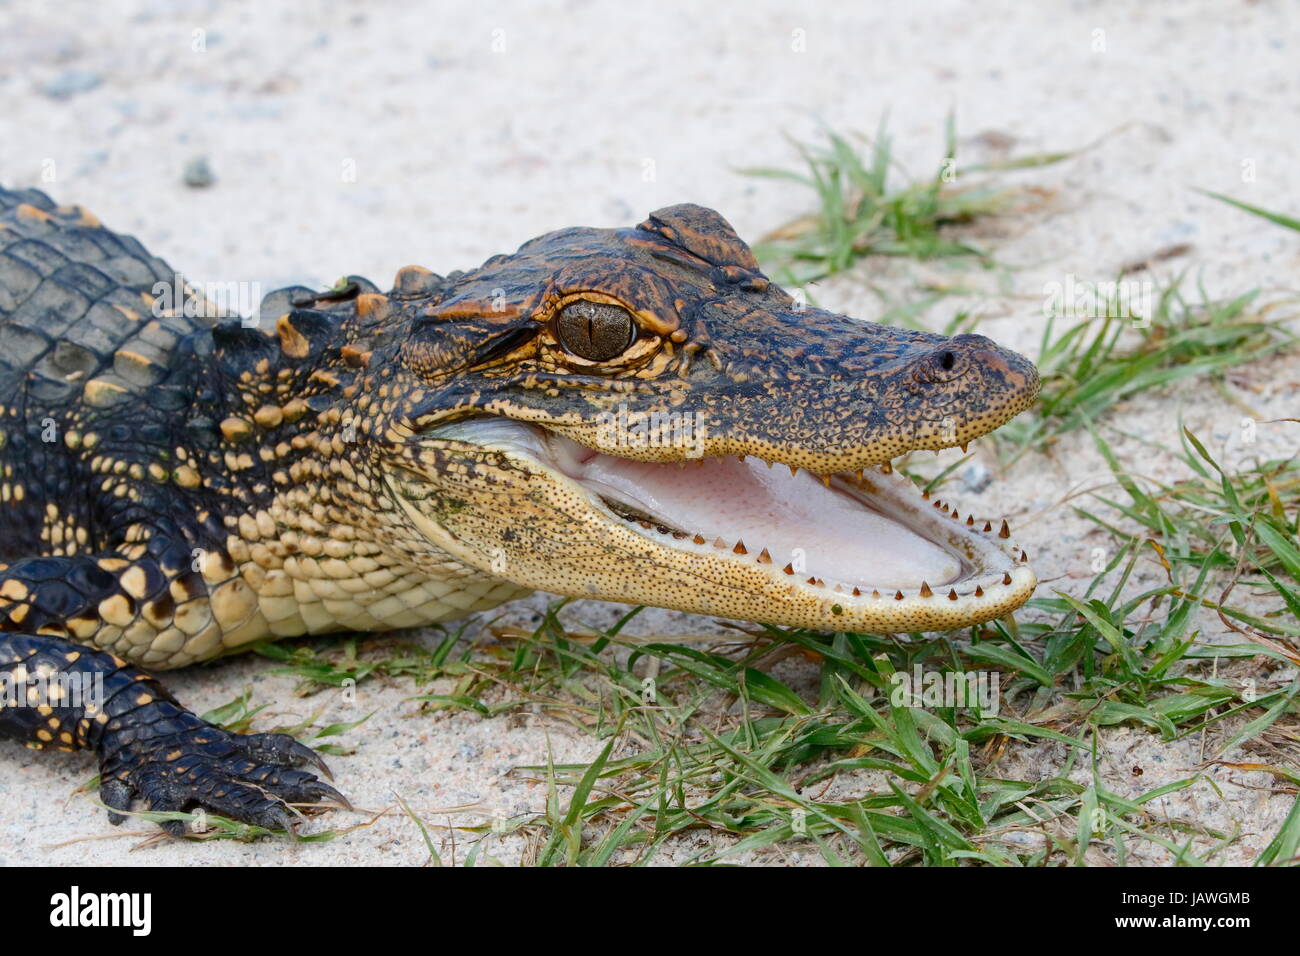 An American alligator, Alligator mississippiensis, with mouth open. Stock Photo